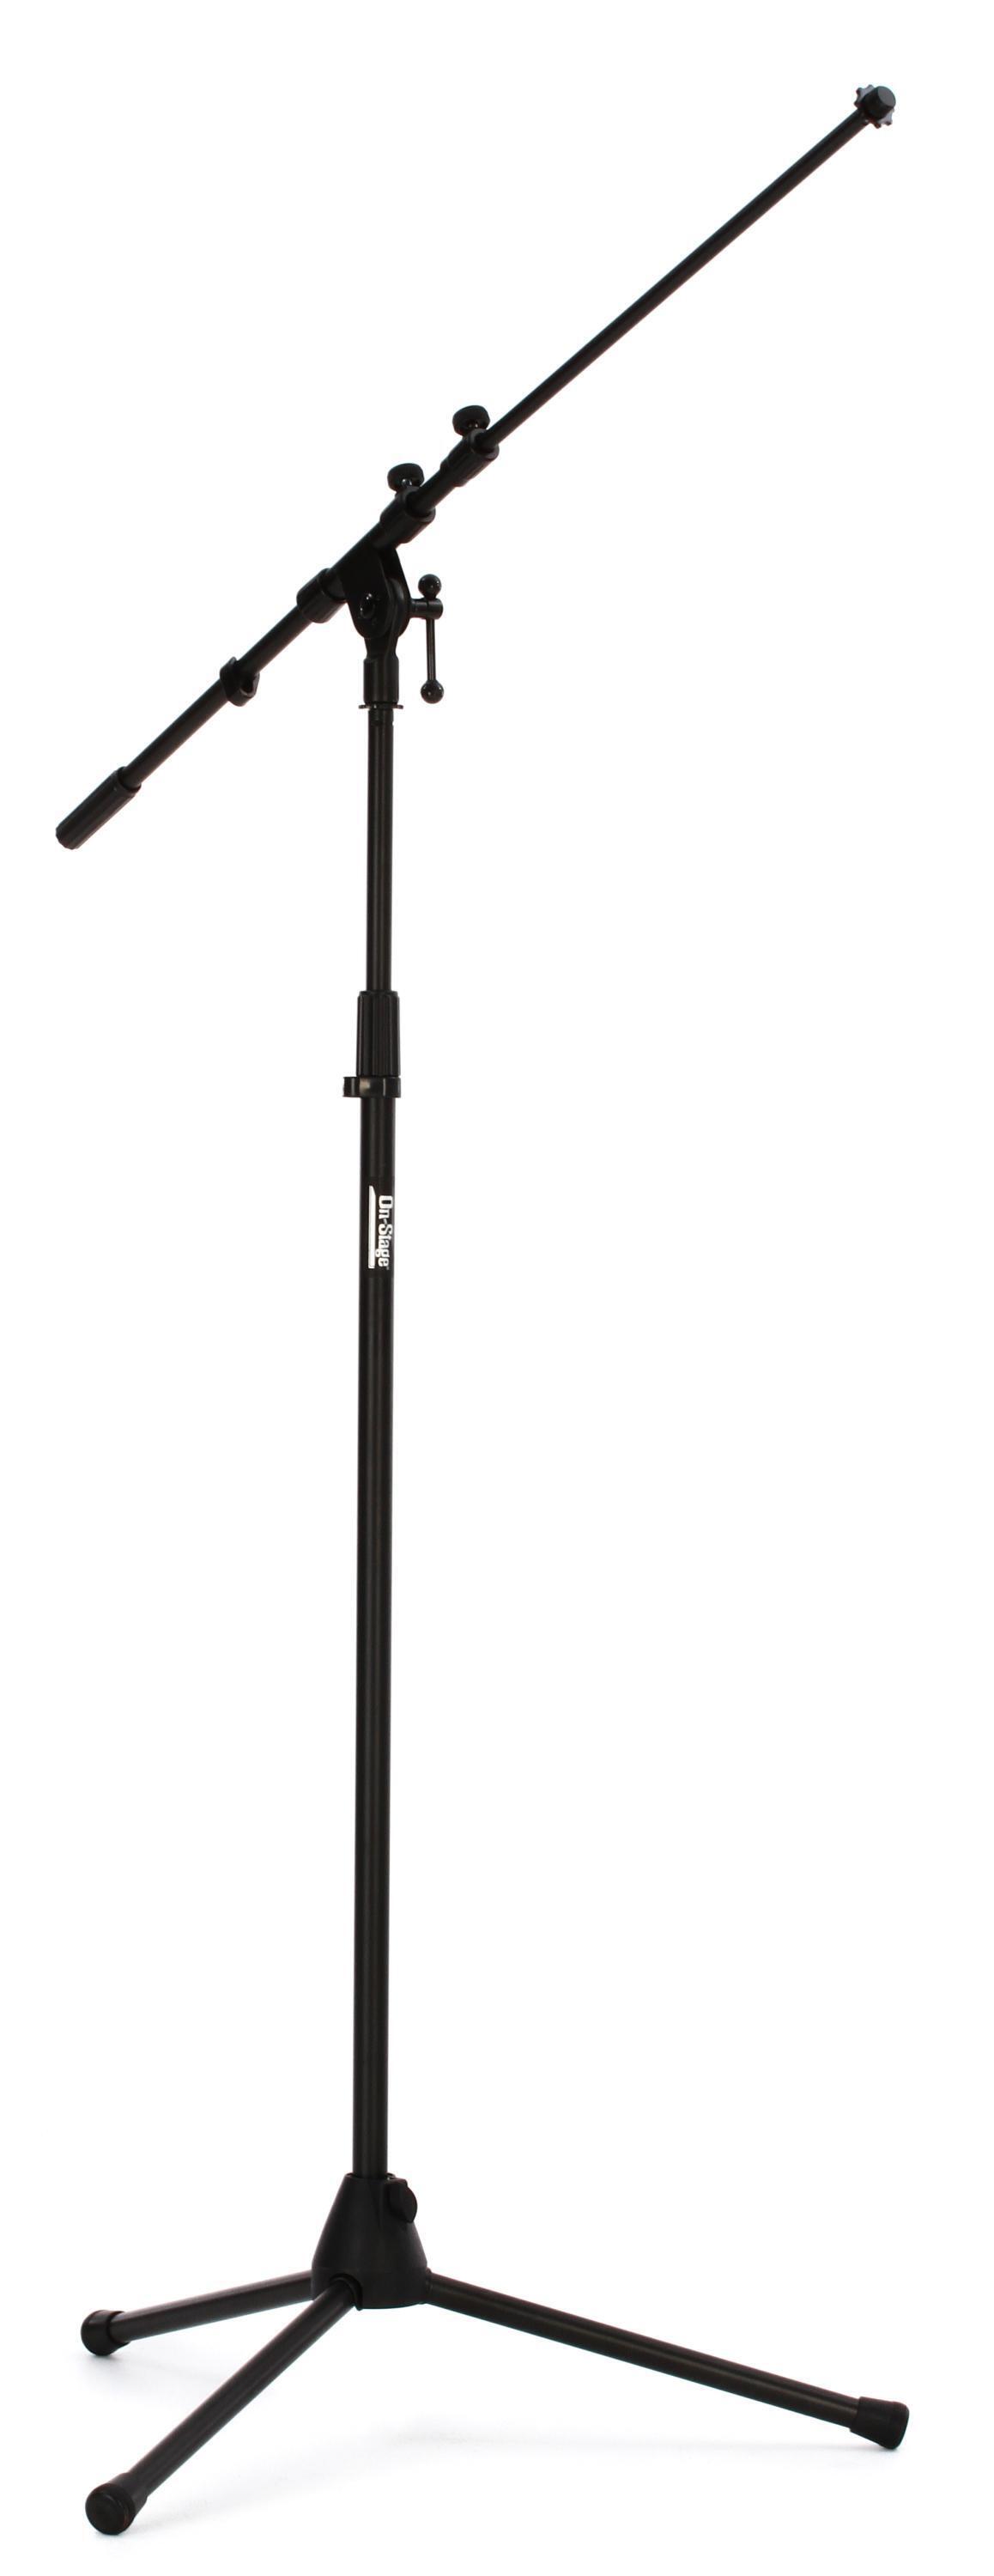 Bundled Item: On-Stage MS7701TB Telescoping Euro Boom Mic Stand